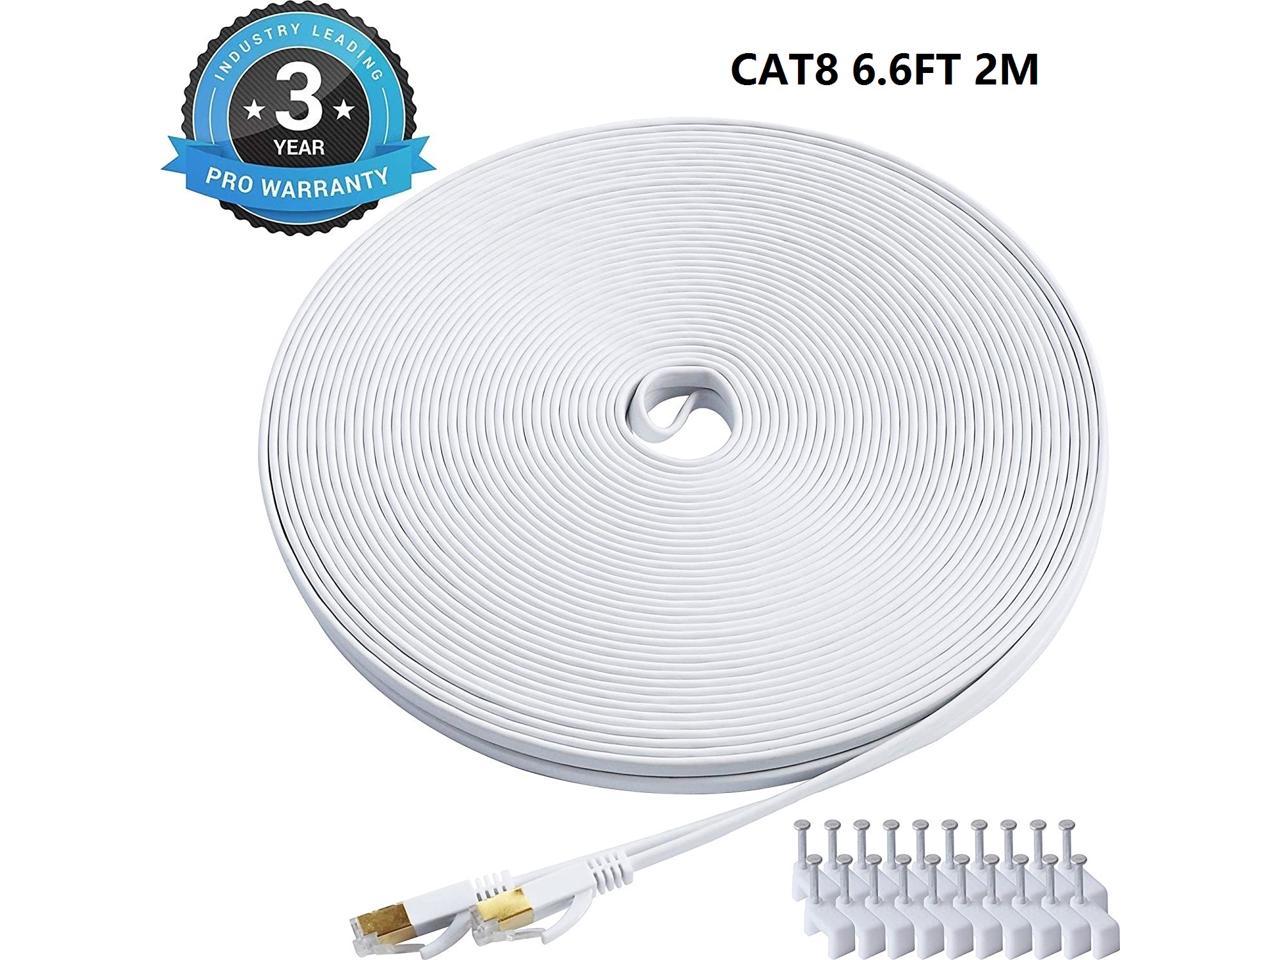 Ethernet Cable Cat6 Ethernet Cable 10M LAN Network Cable RJ45 Network High Speed Ethernet Cable Router Modem Switch with 20 Cable Clips White XINCA Flat Gigabit Internet Cables 